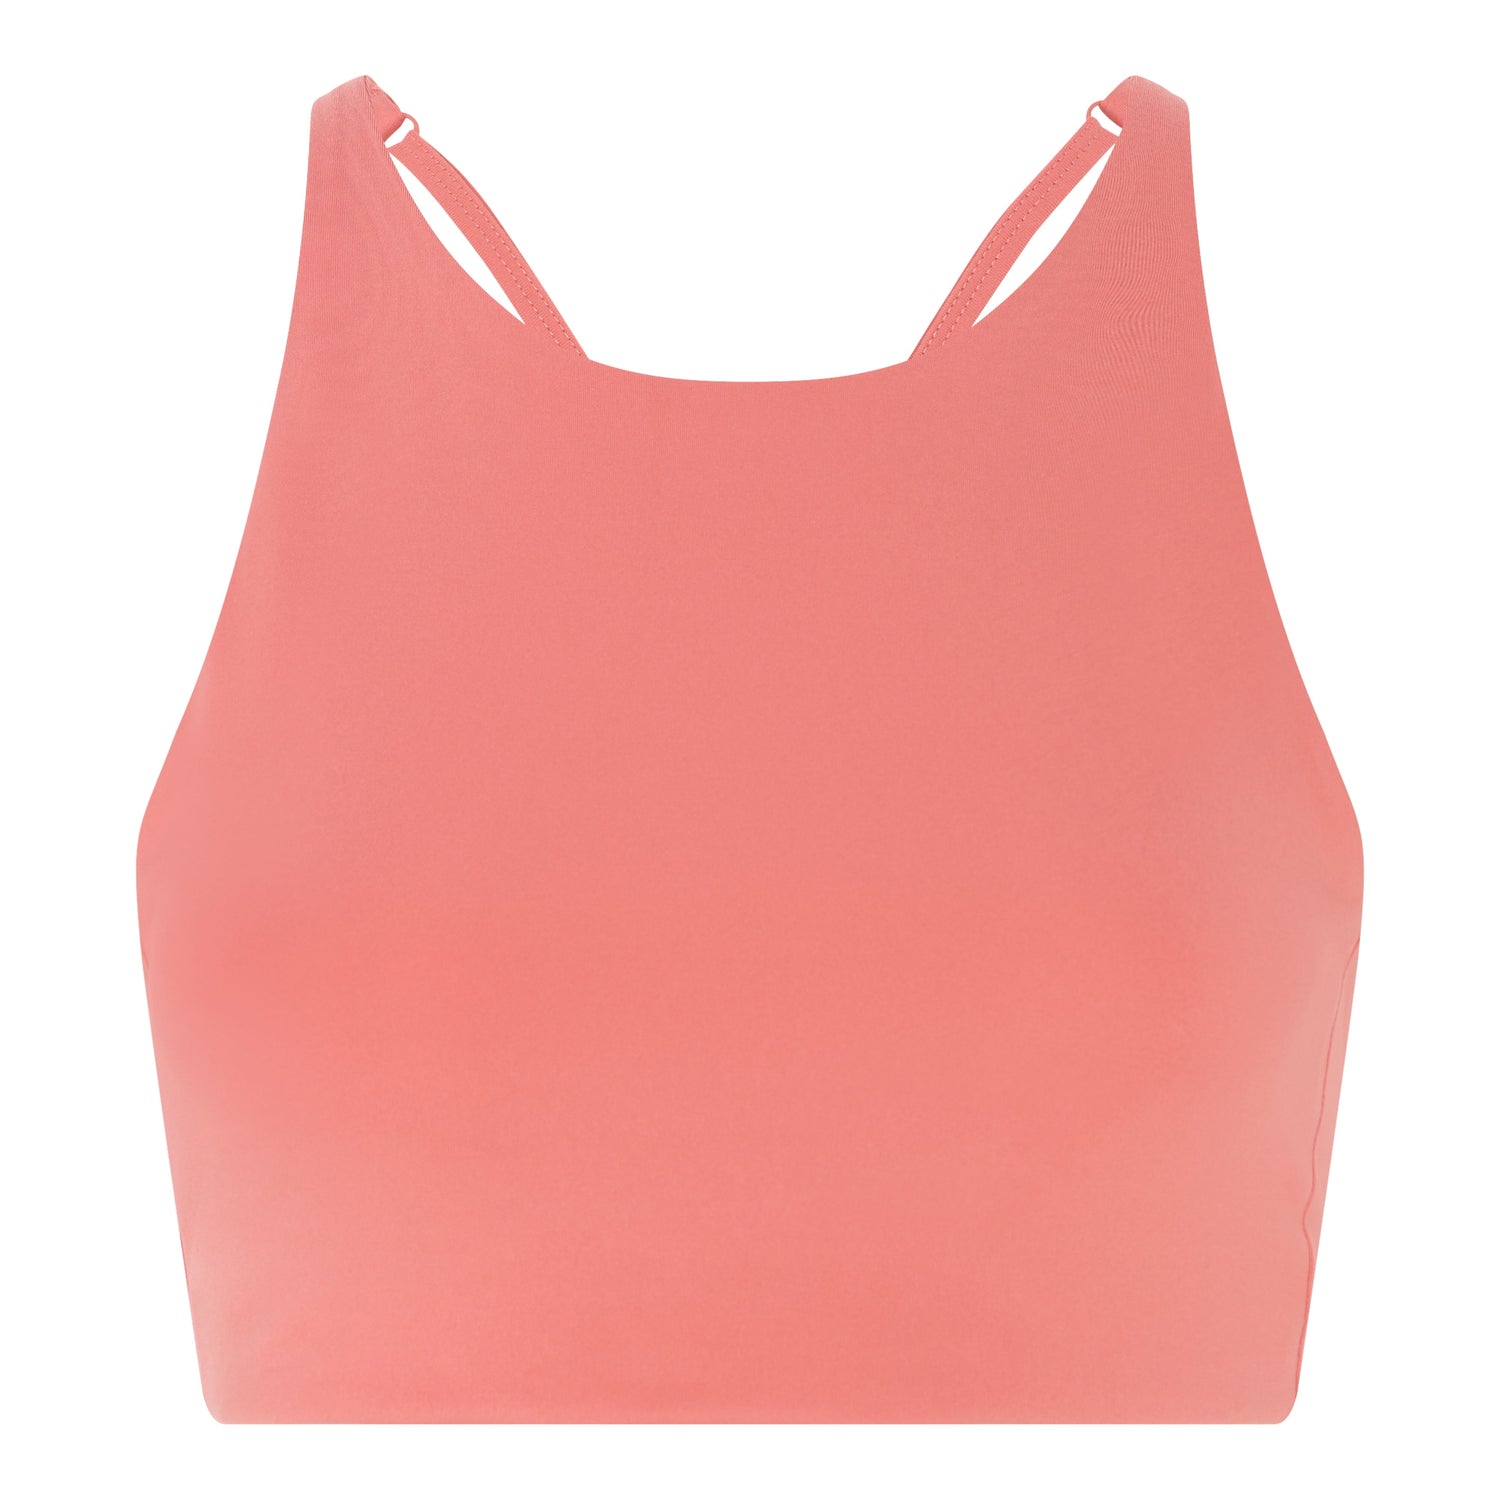 Girlfriend Collective - Topanga sports Bra - Made from recycled plastic bottles - Weekendbee - sustainable sportswear